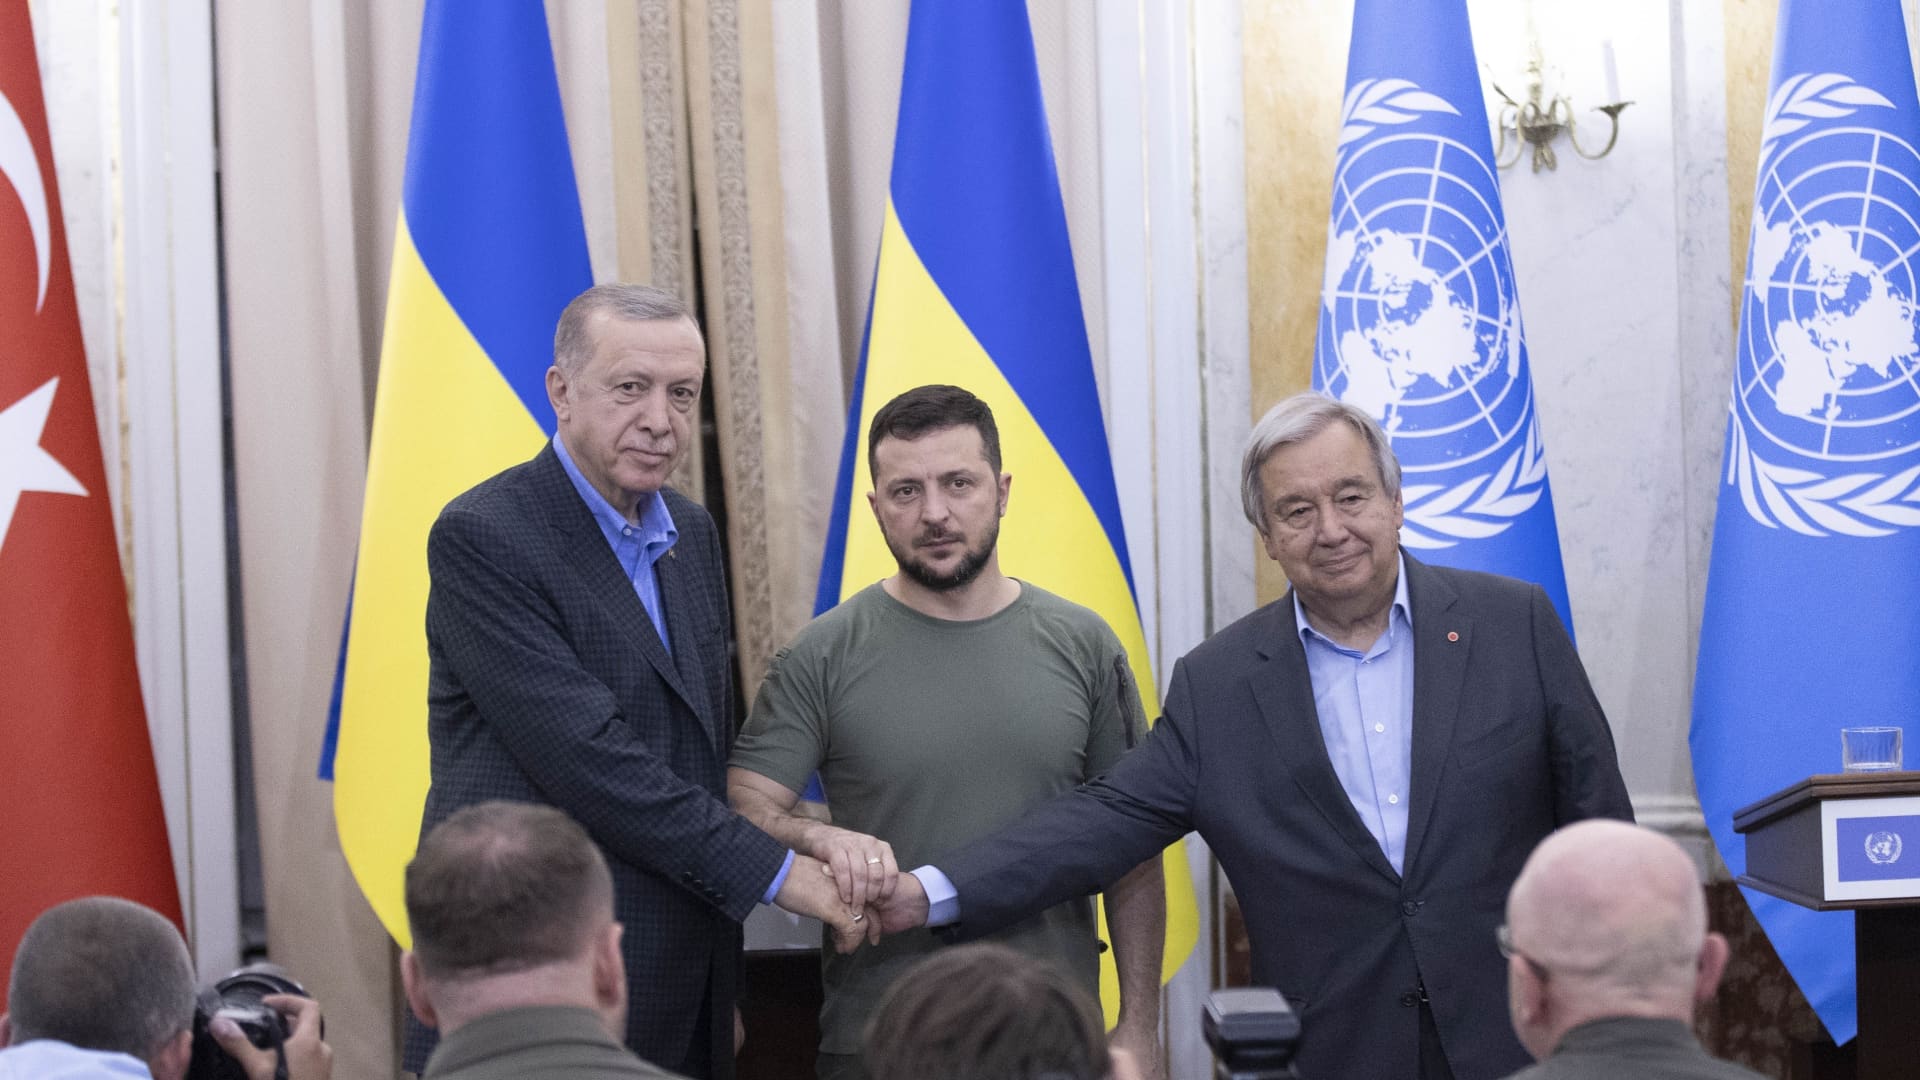 Turkish President Recep Tayyip Erdogan (L), Ukrainian President Volodymyr Zelenskyy (C) and United Nations Secretary-General Antonio Guterres (R) pose during a joint news conference after their meeting in Lviv, Ukraine on August 18, 2022.